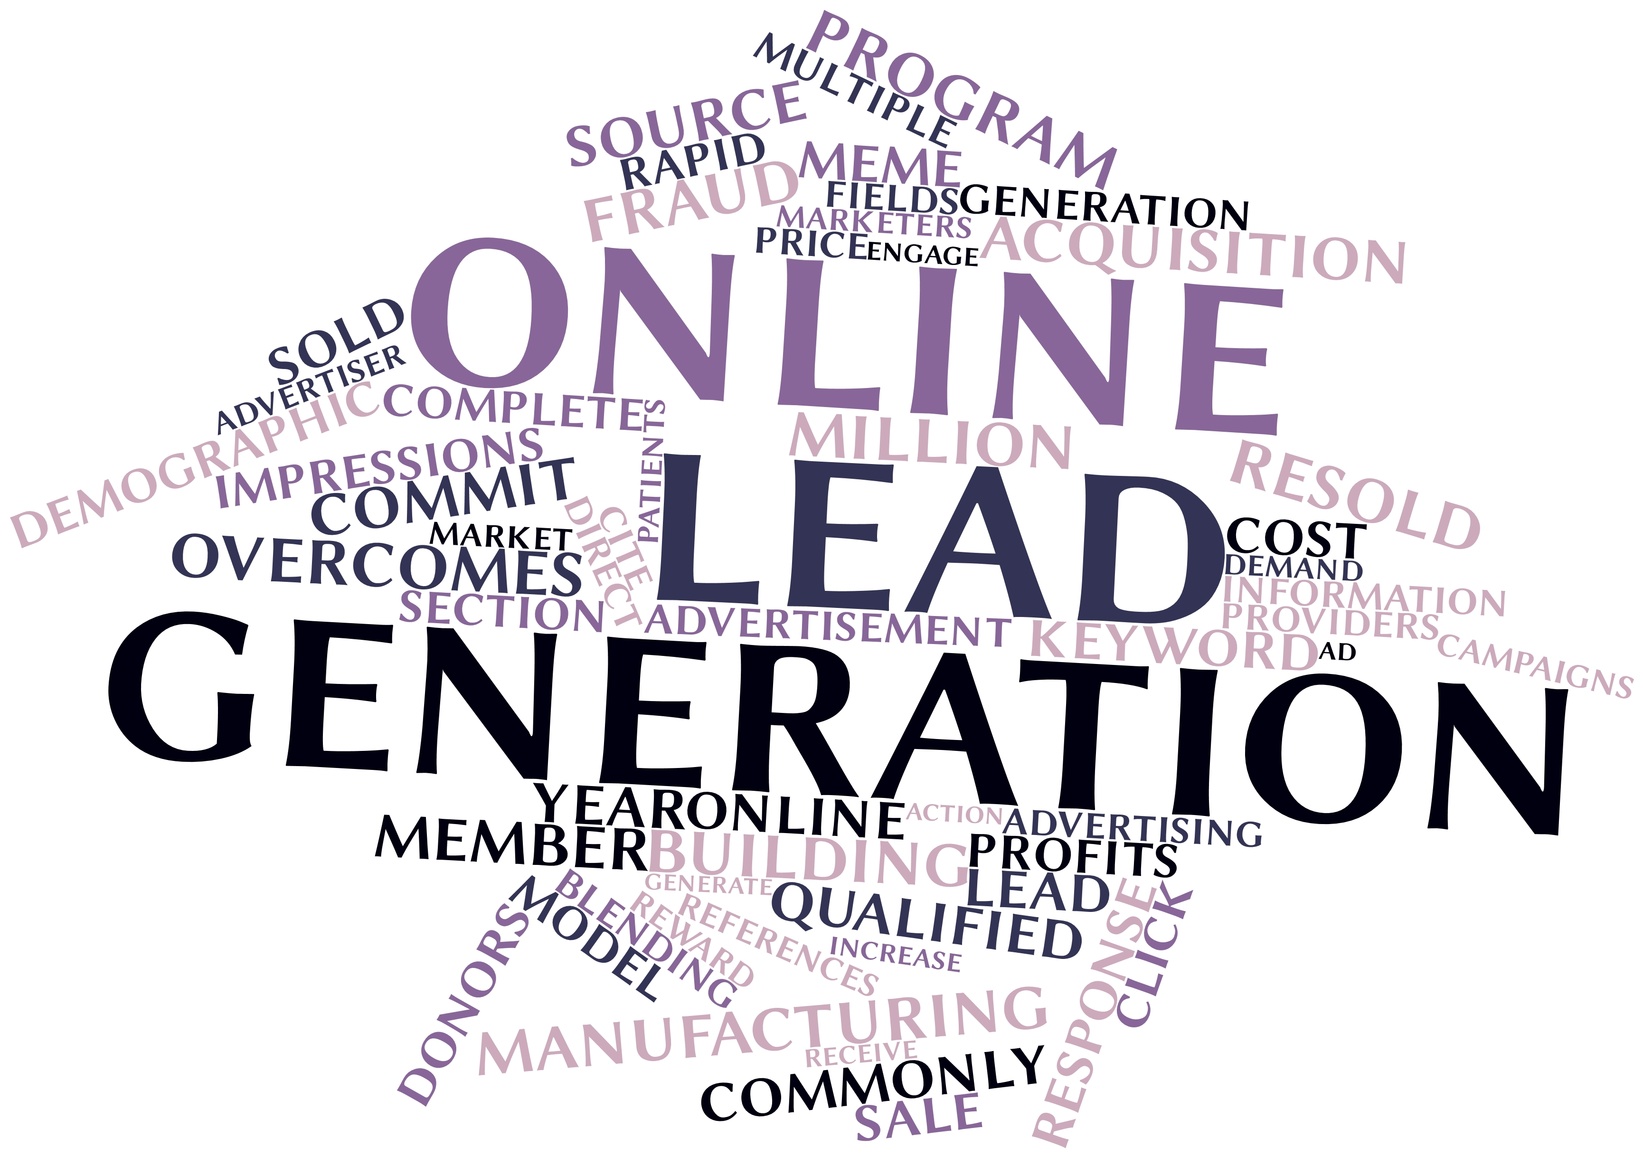 creating lead generation and backlinks